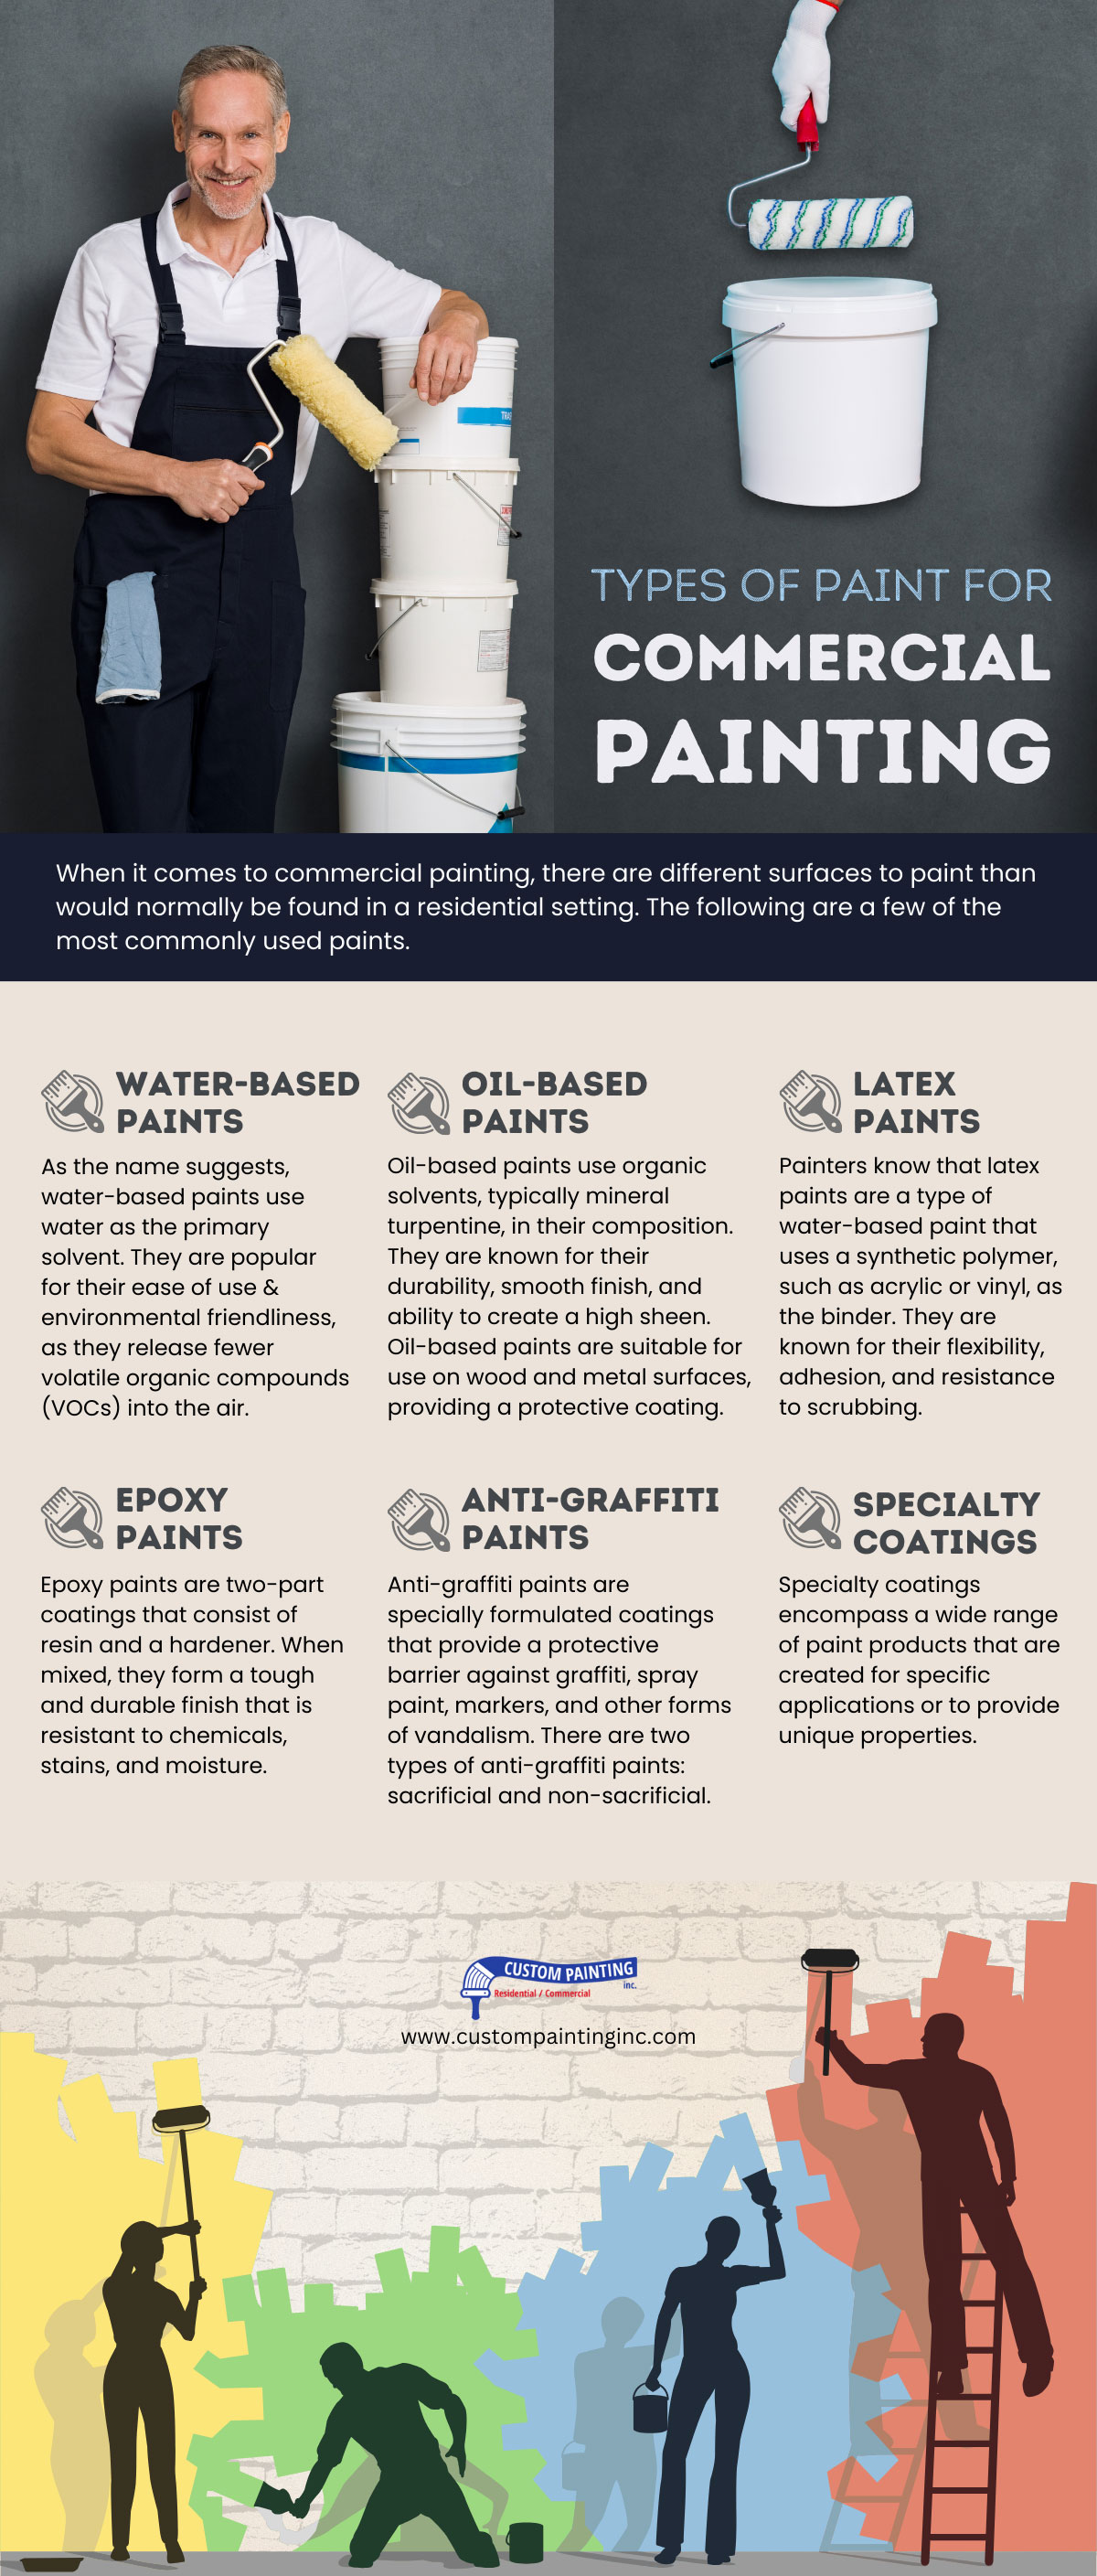 Types of Paint for Commercial Painting